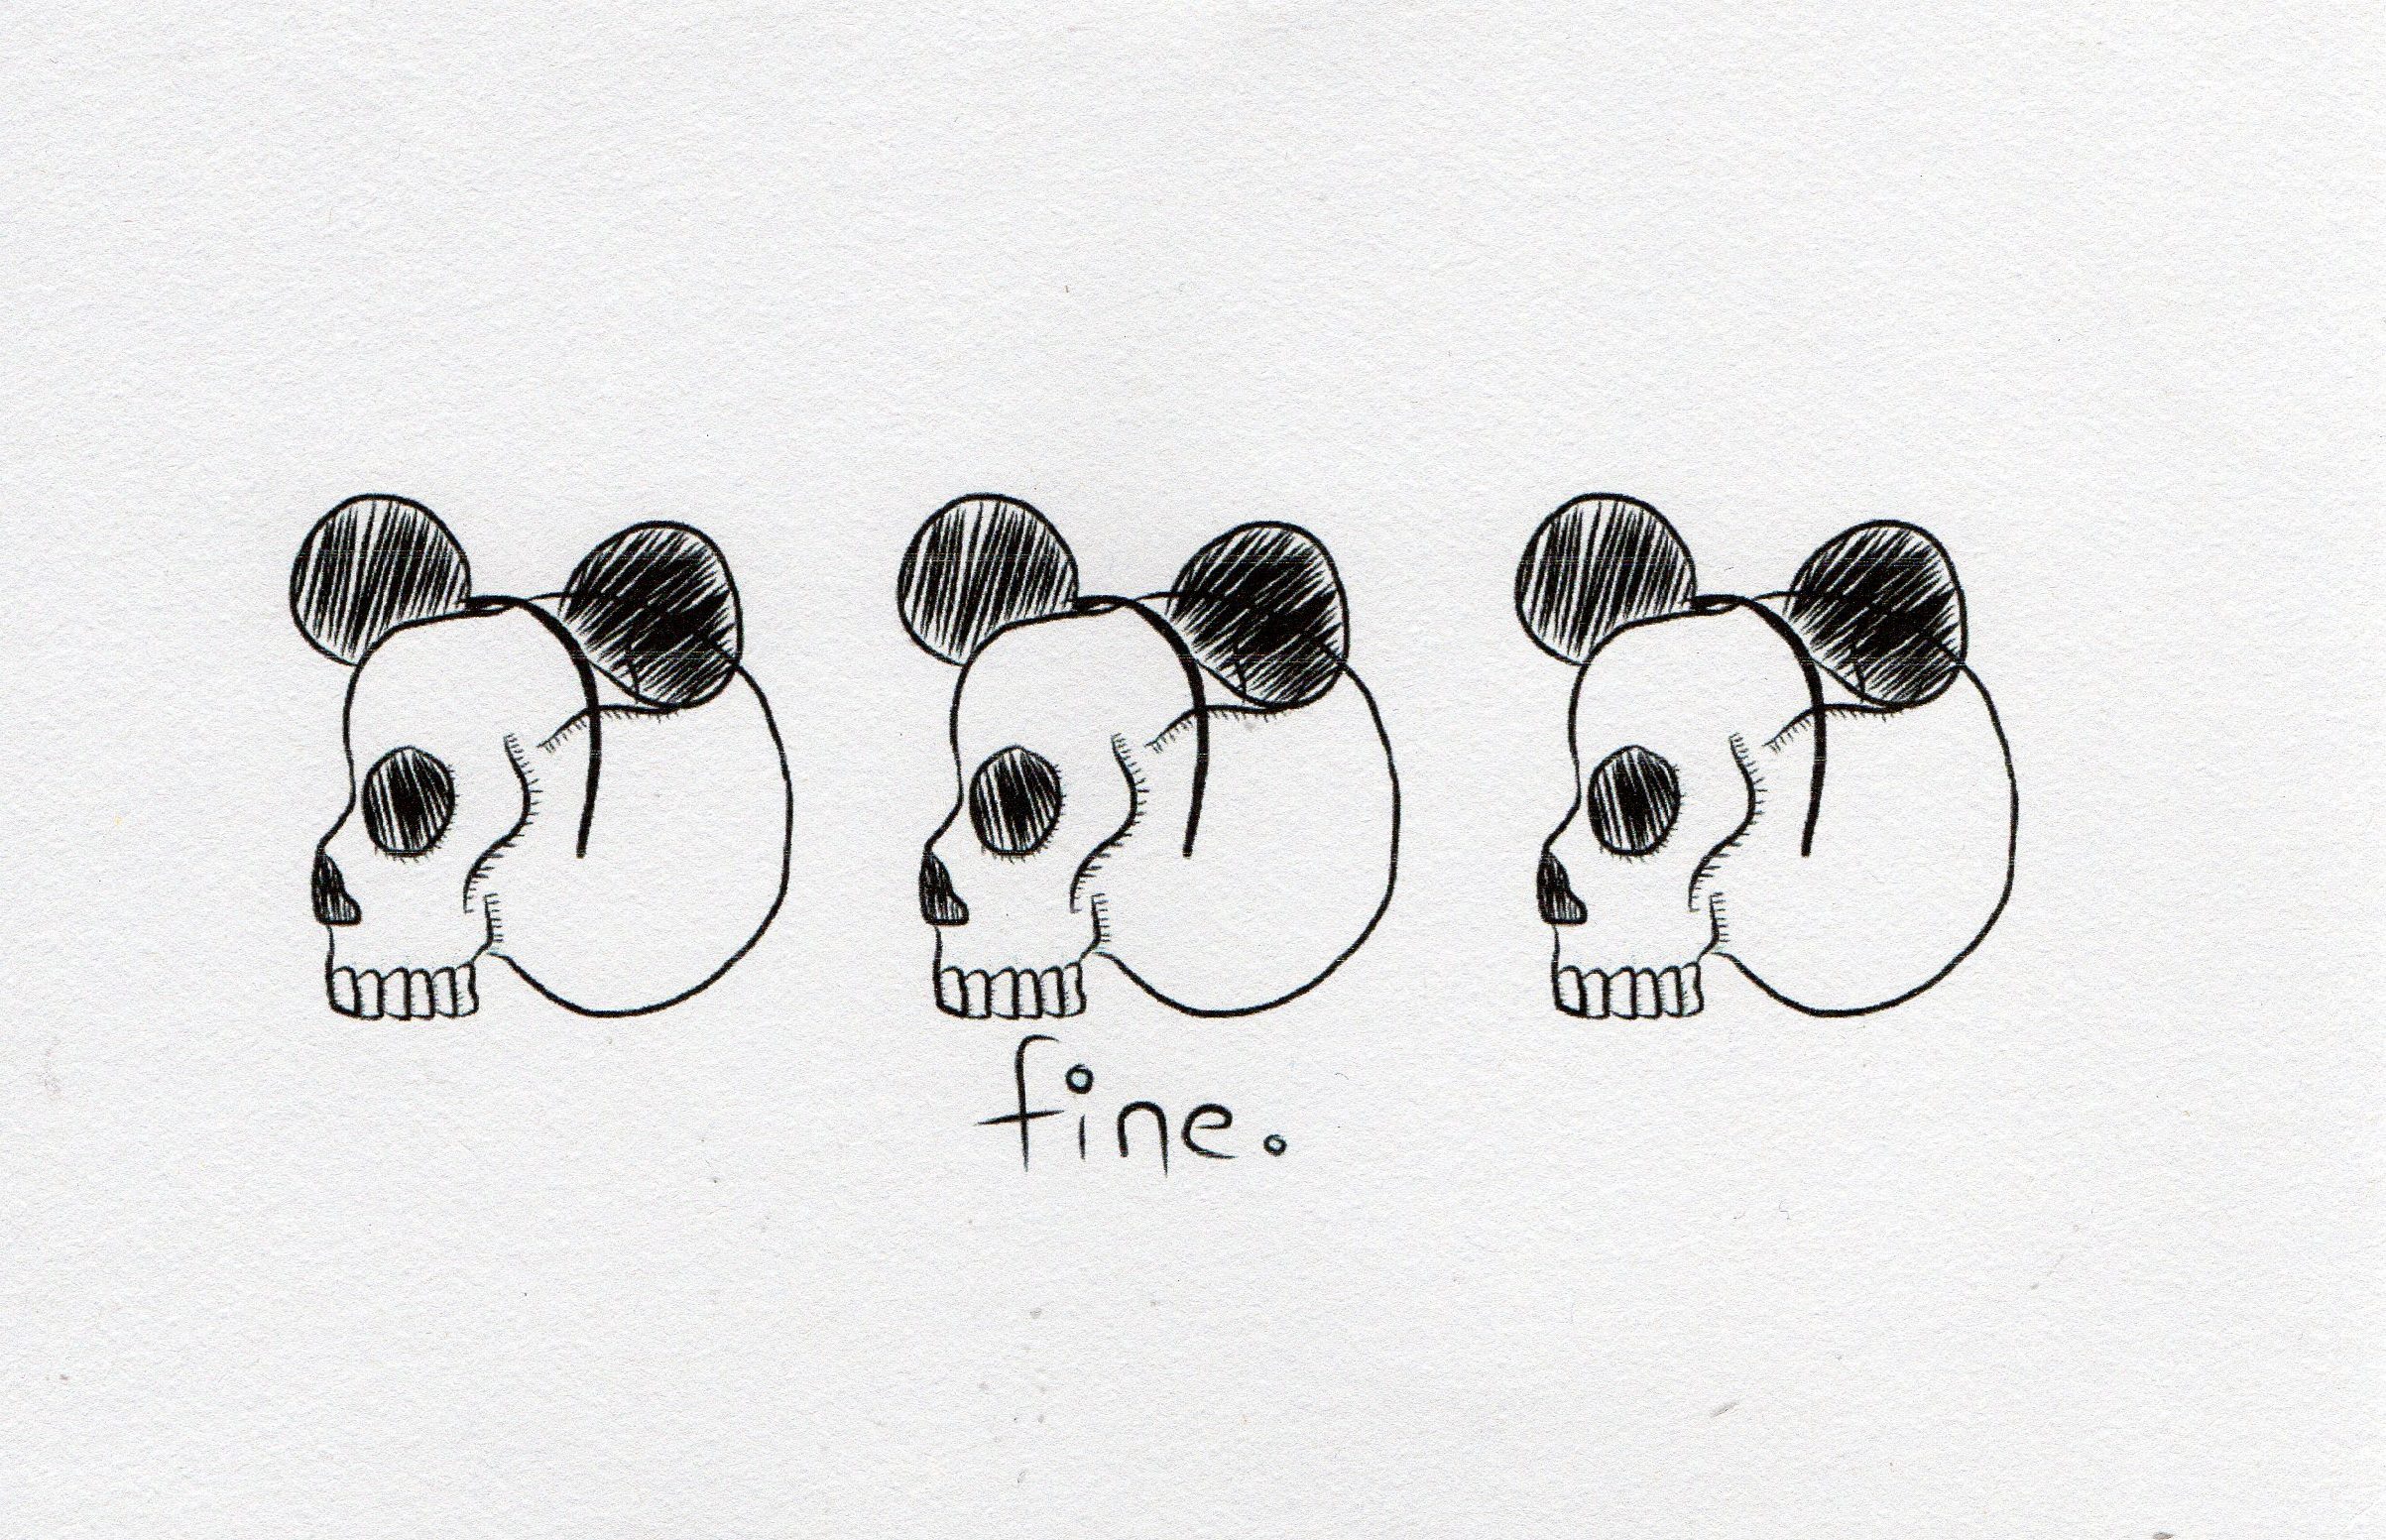 A drawing of three skulls with the text "fine" underneath them as they wear Mickey Mouse looking head bands.